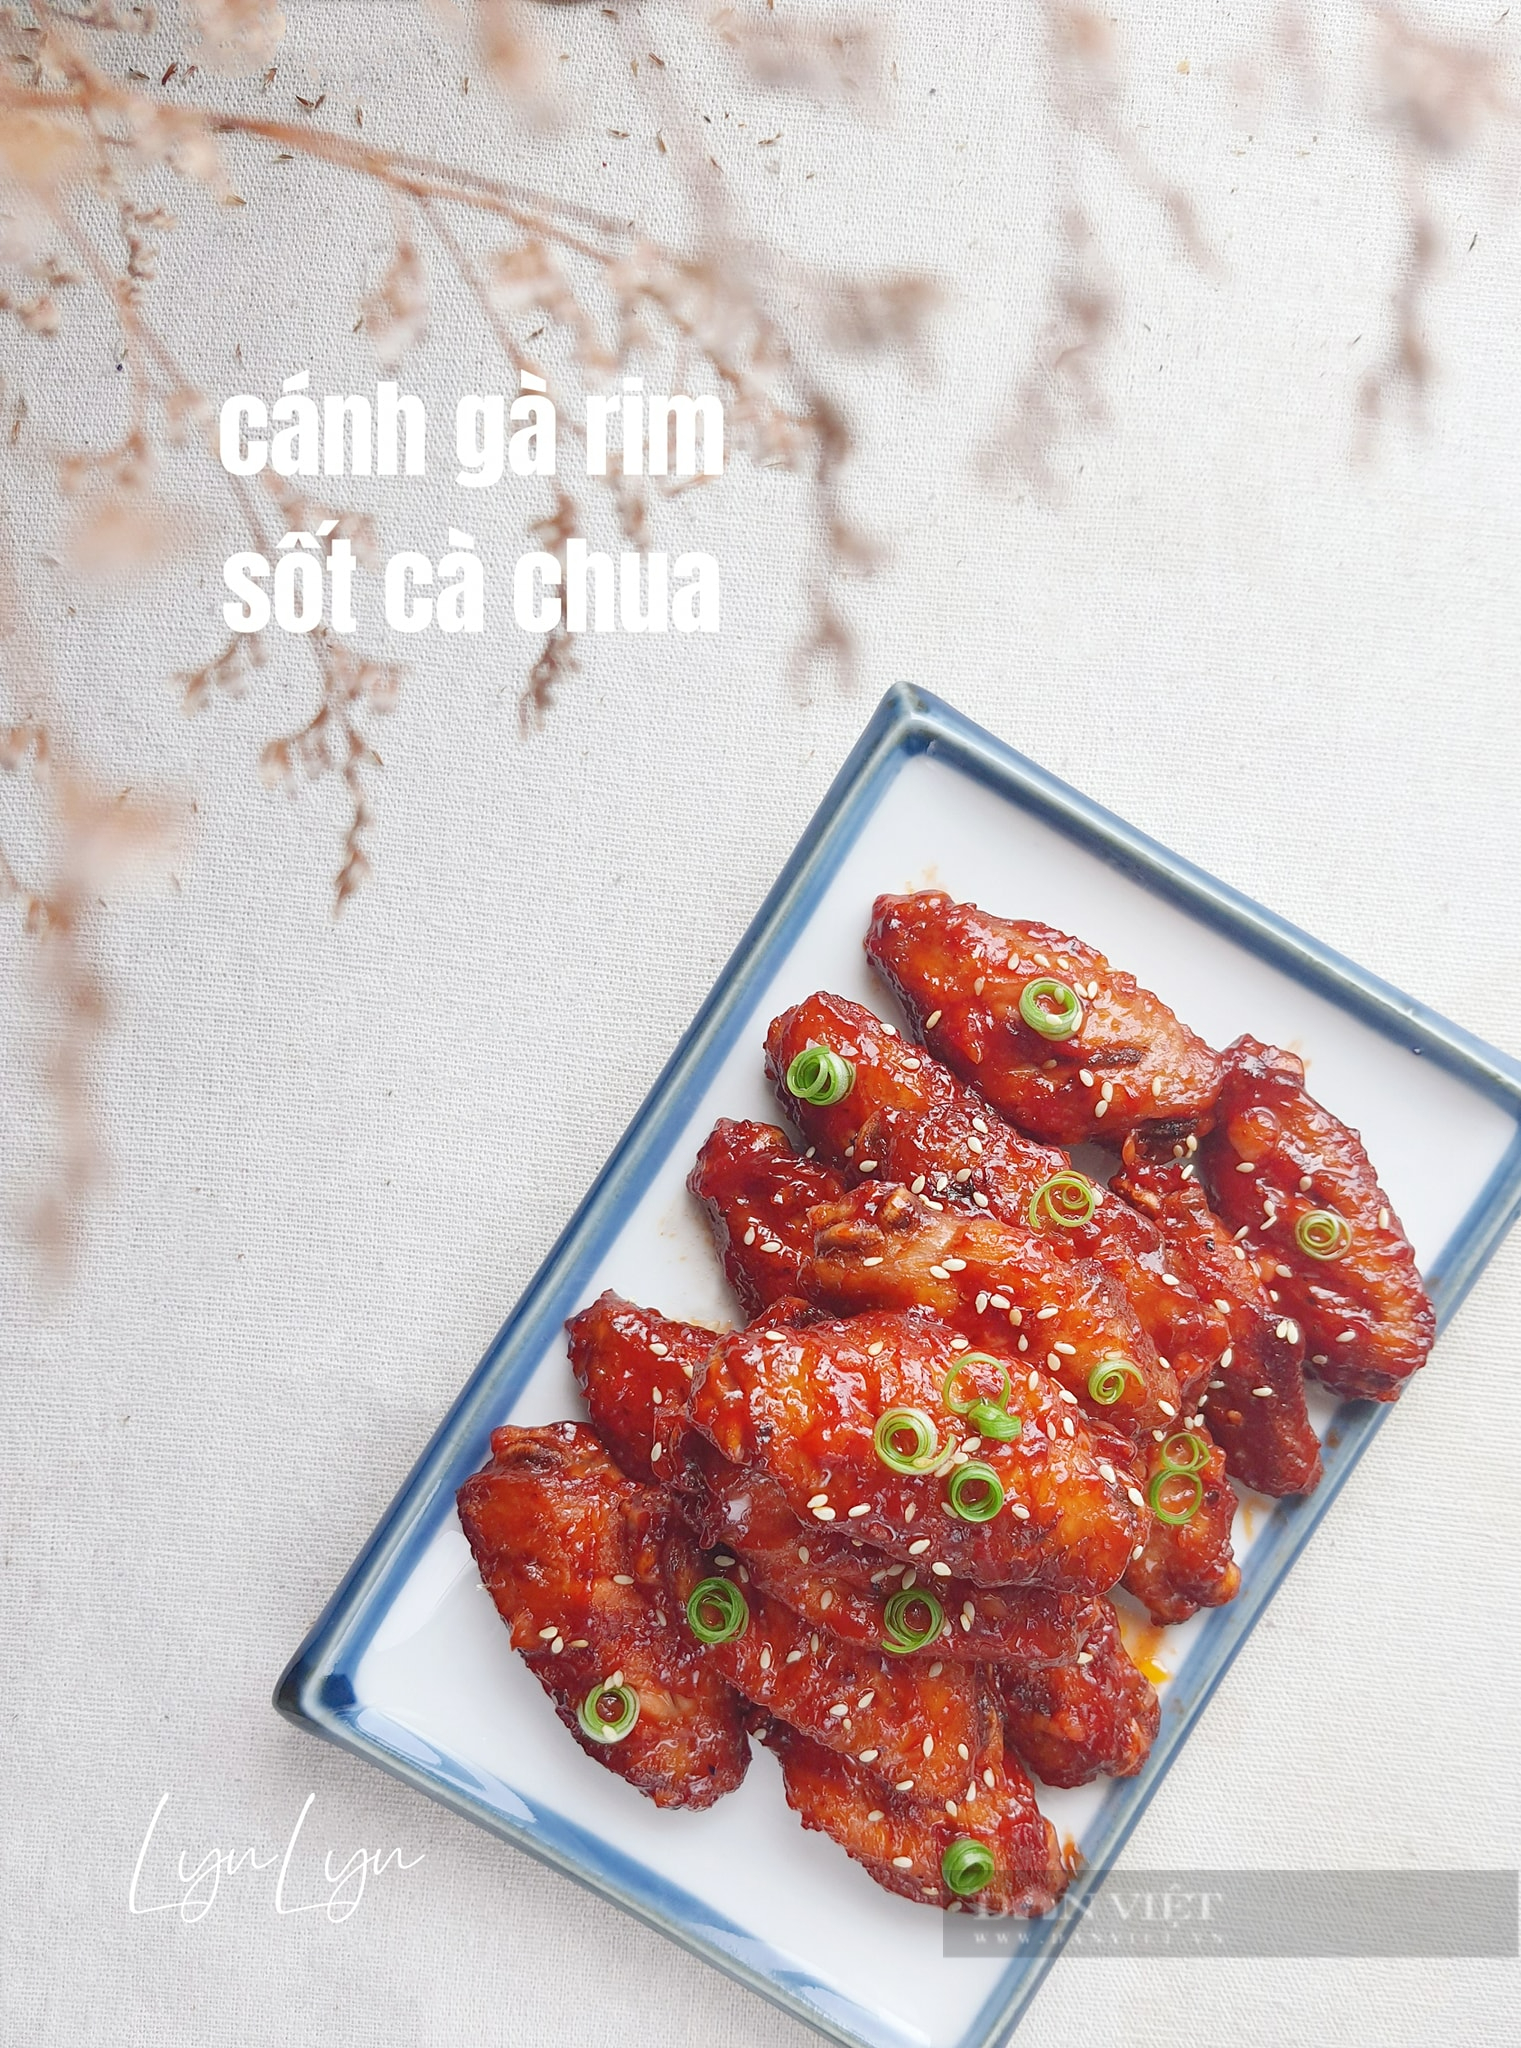 Chicken wings marinated with this sauce, guaranteed to be beautiful and delicious - Photo 2.